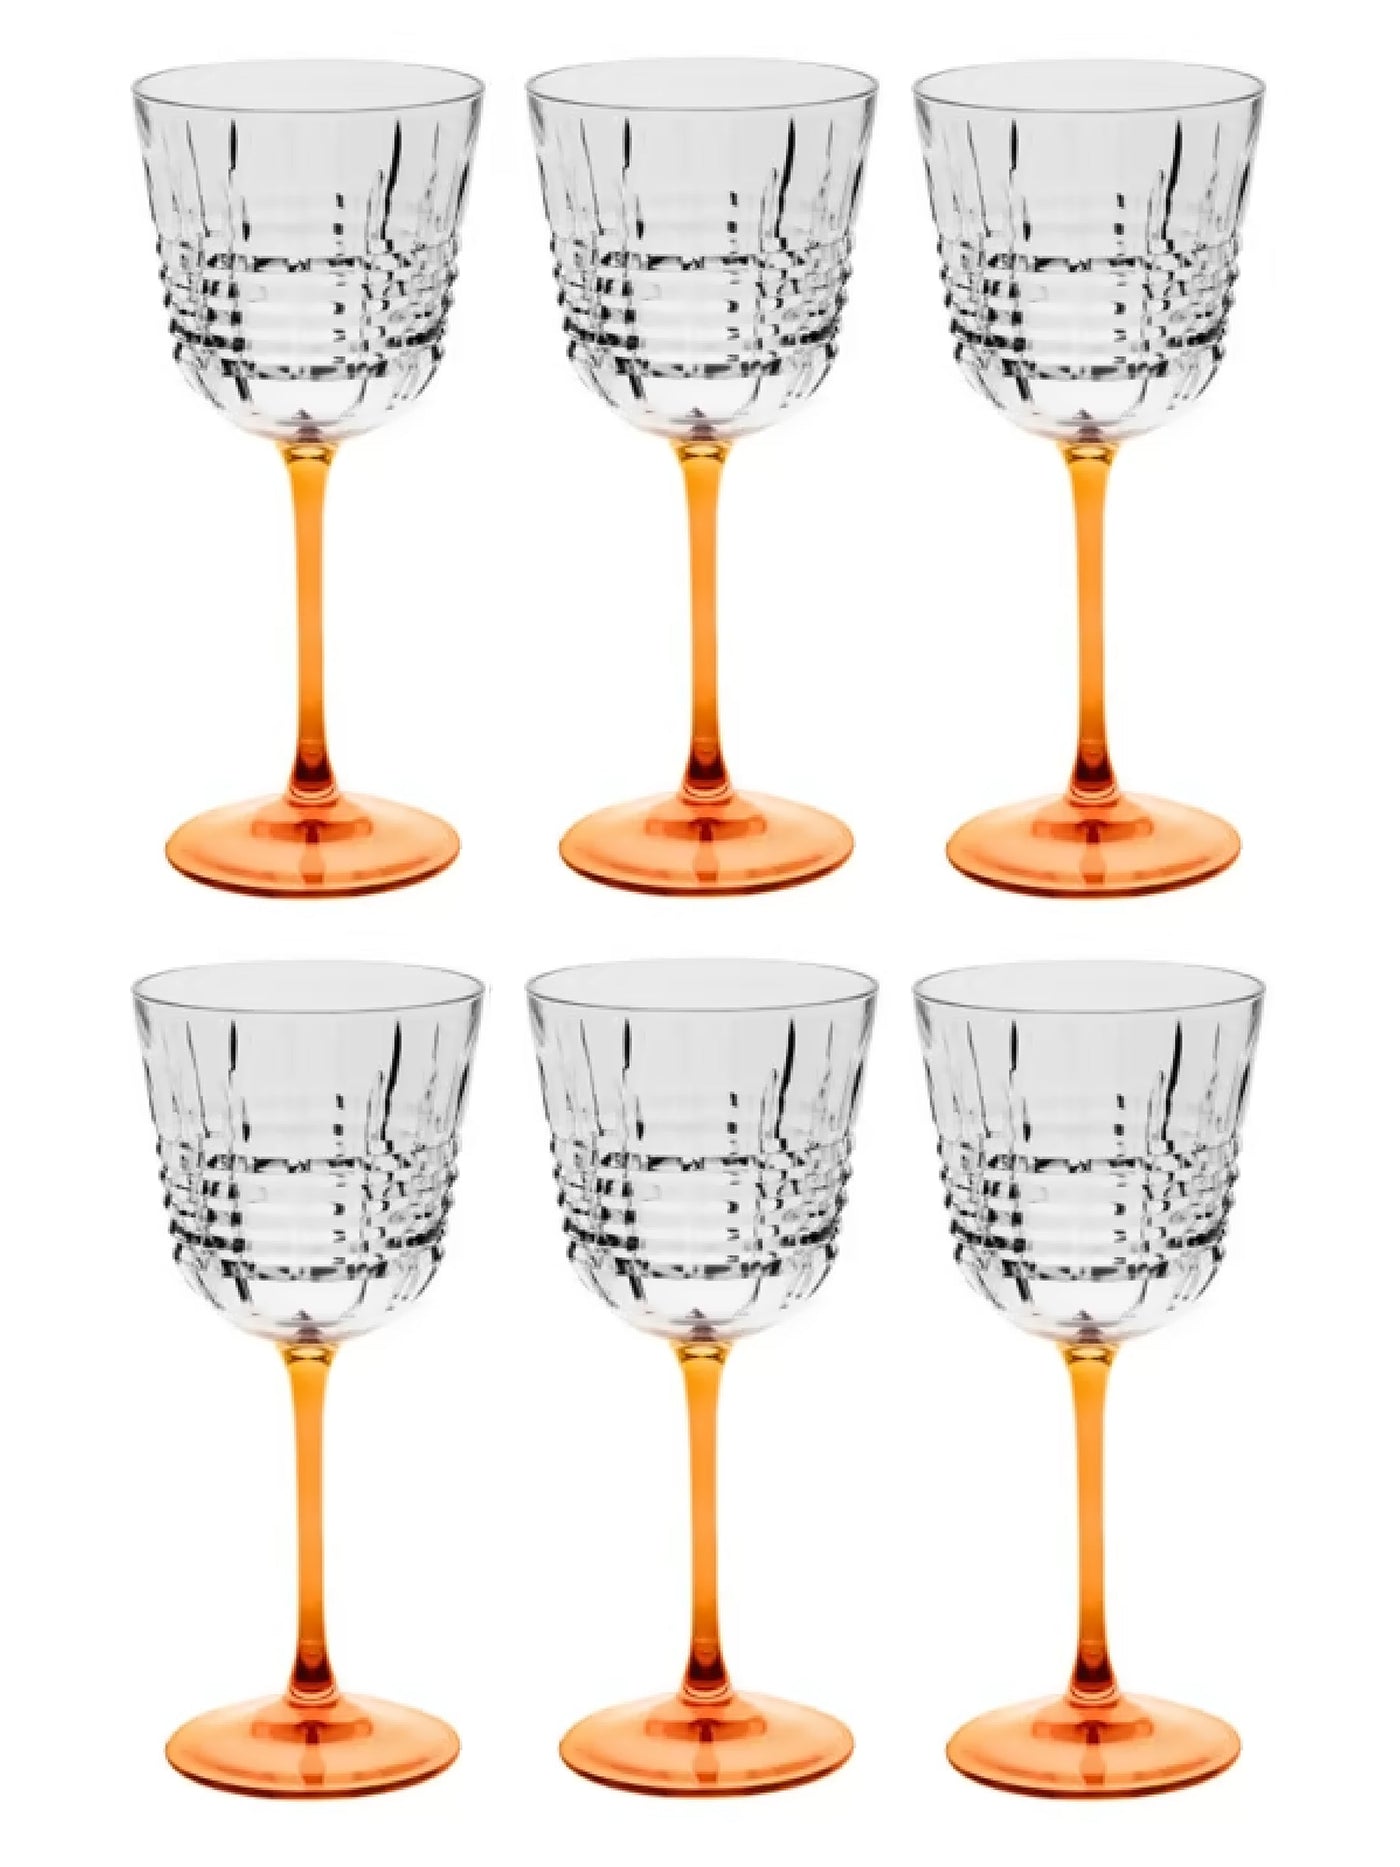 Incontro Stem Wine Glasses Set in Amber by Creart